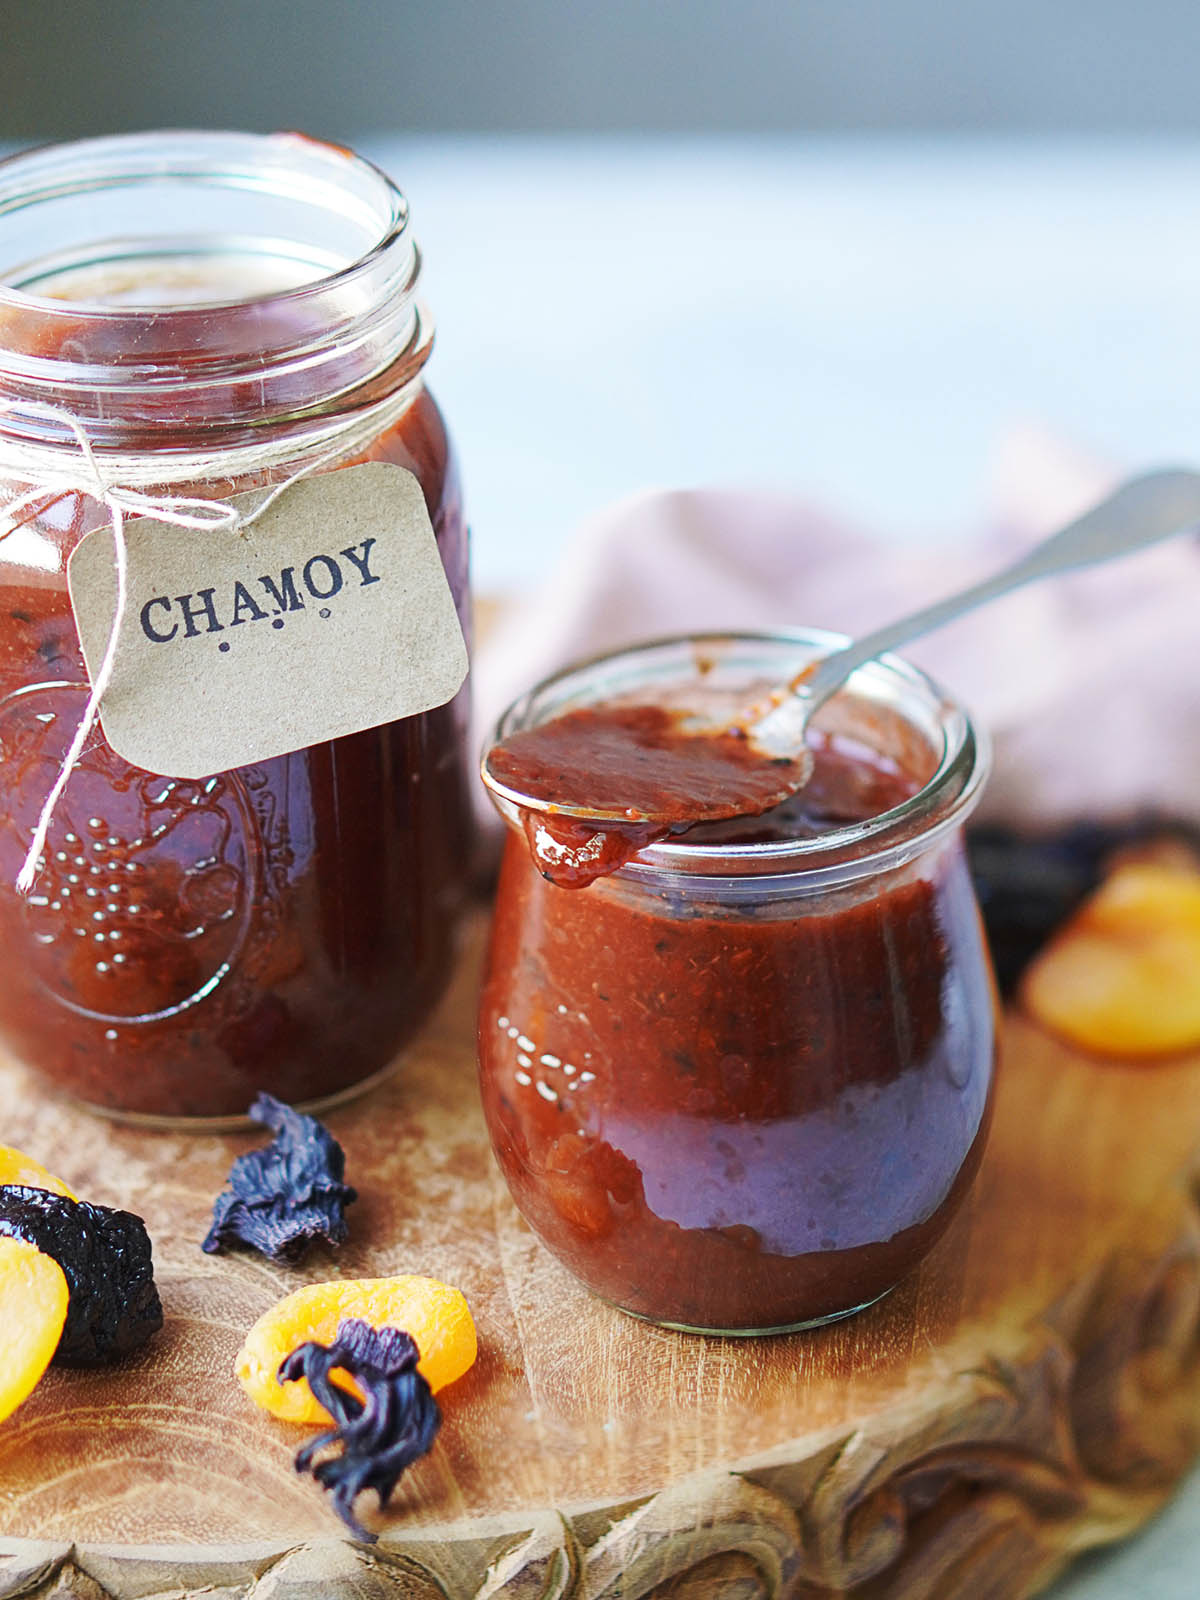 Two small jars with Chamoy placed on a wood board.